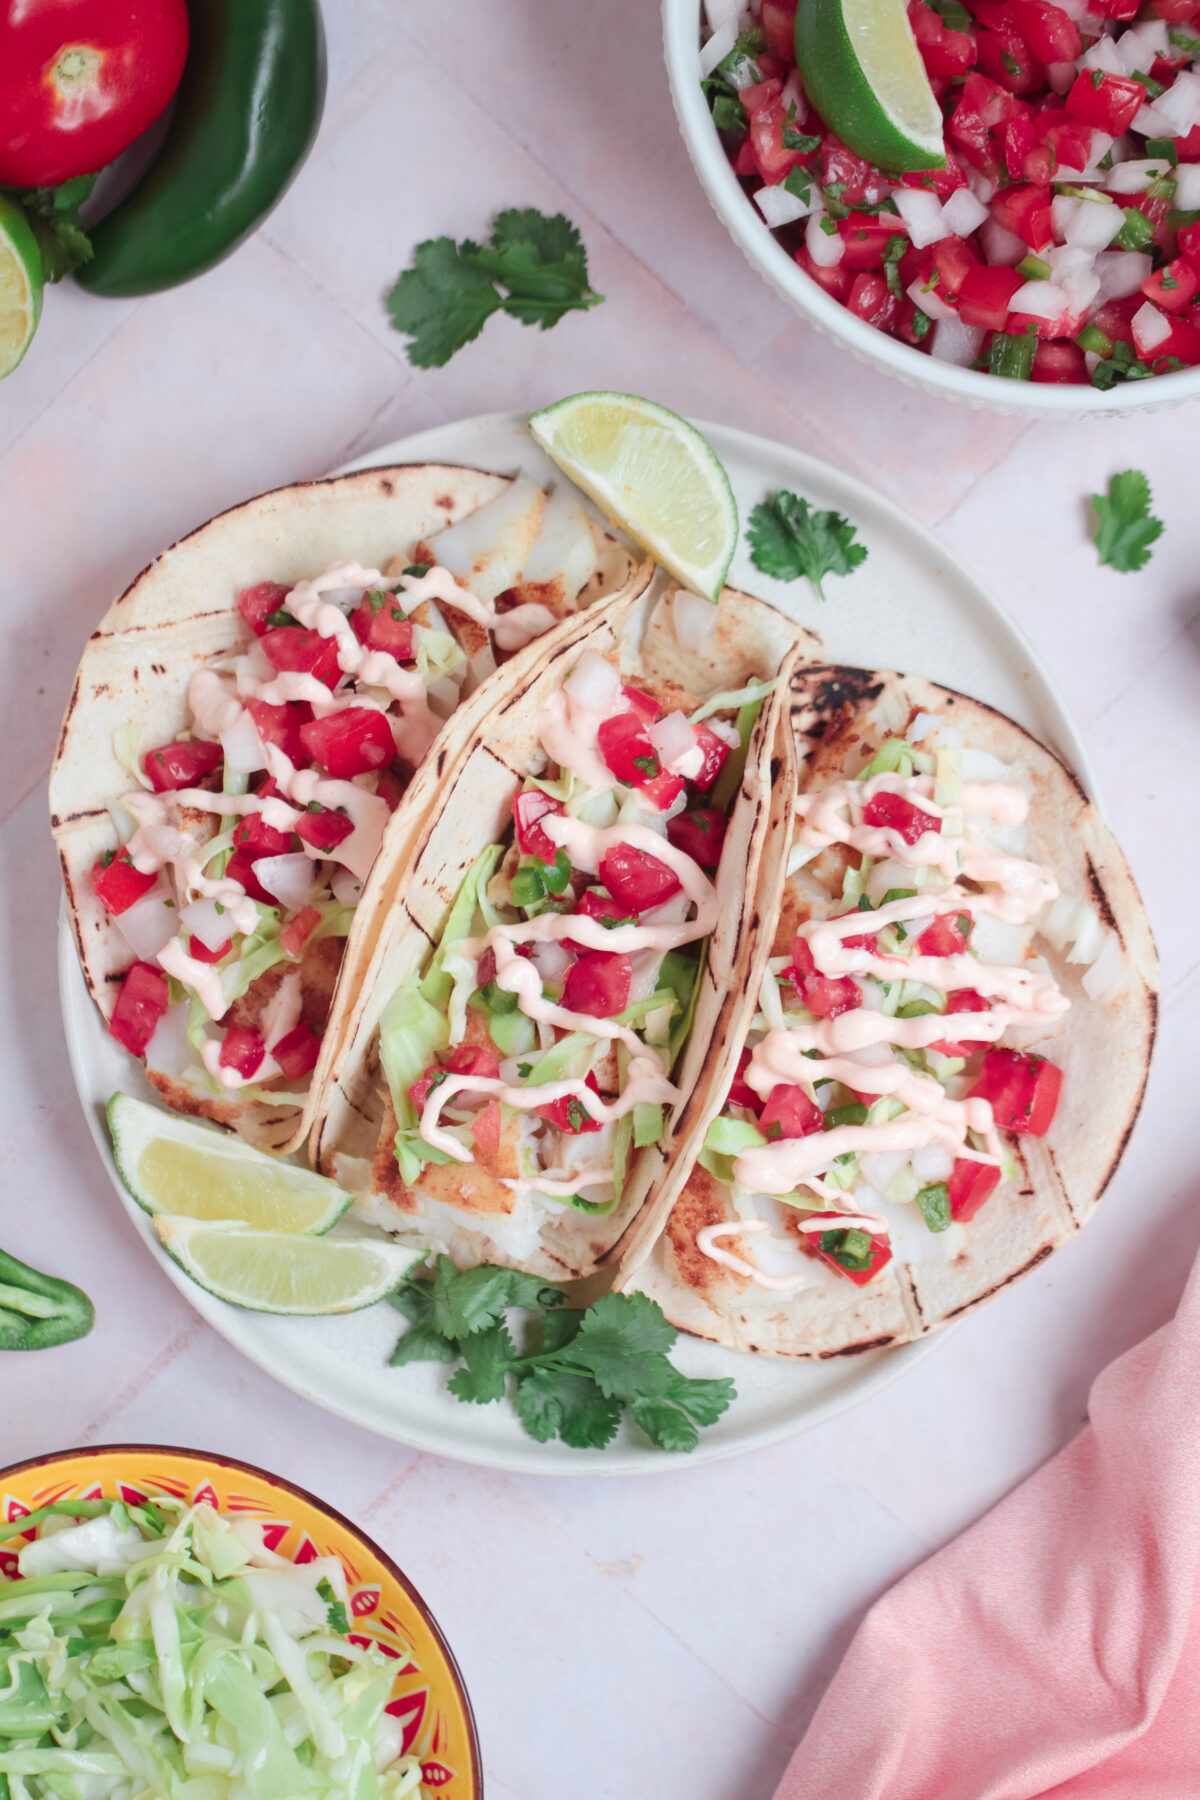 Make your next taco night extra special with these easy fish tacos topped with zesty cilantro lime slaw and sriracha sour cream!